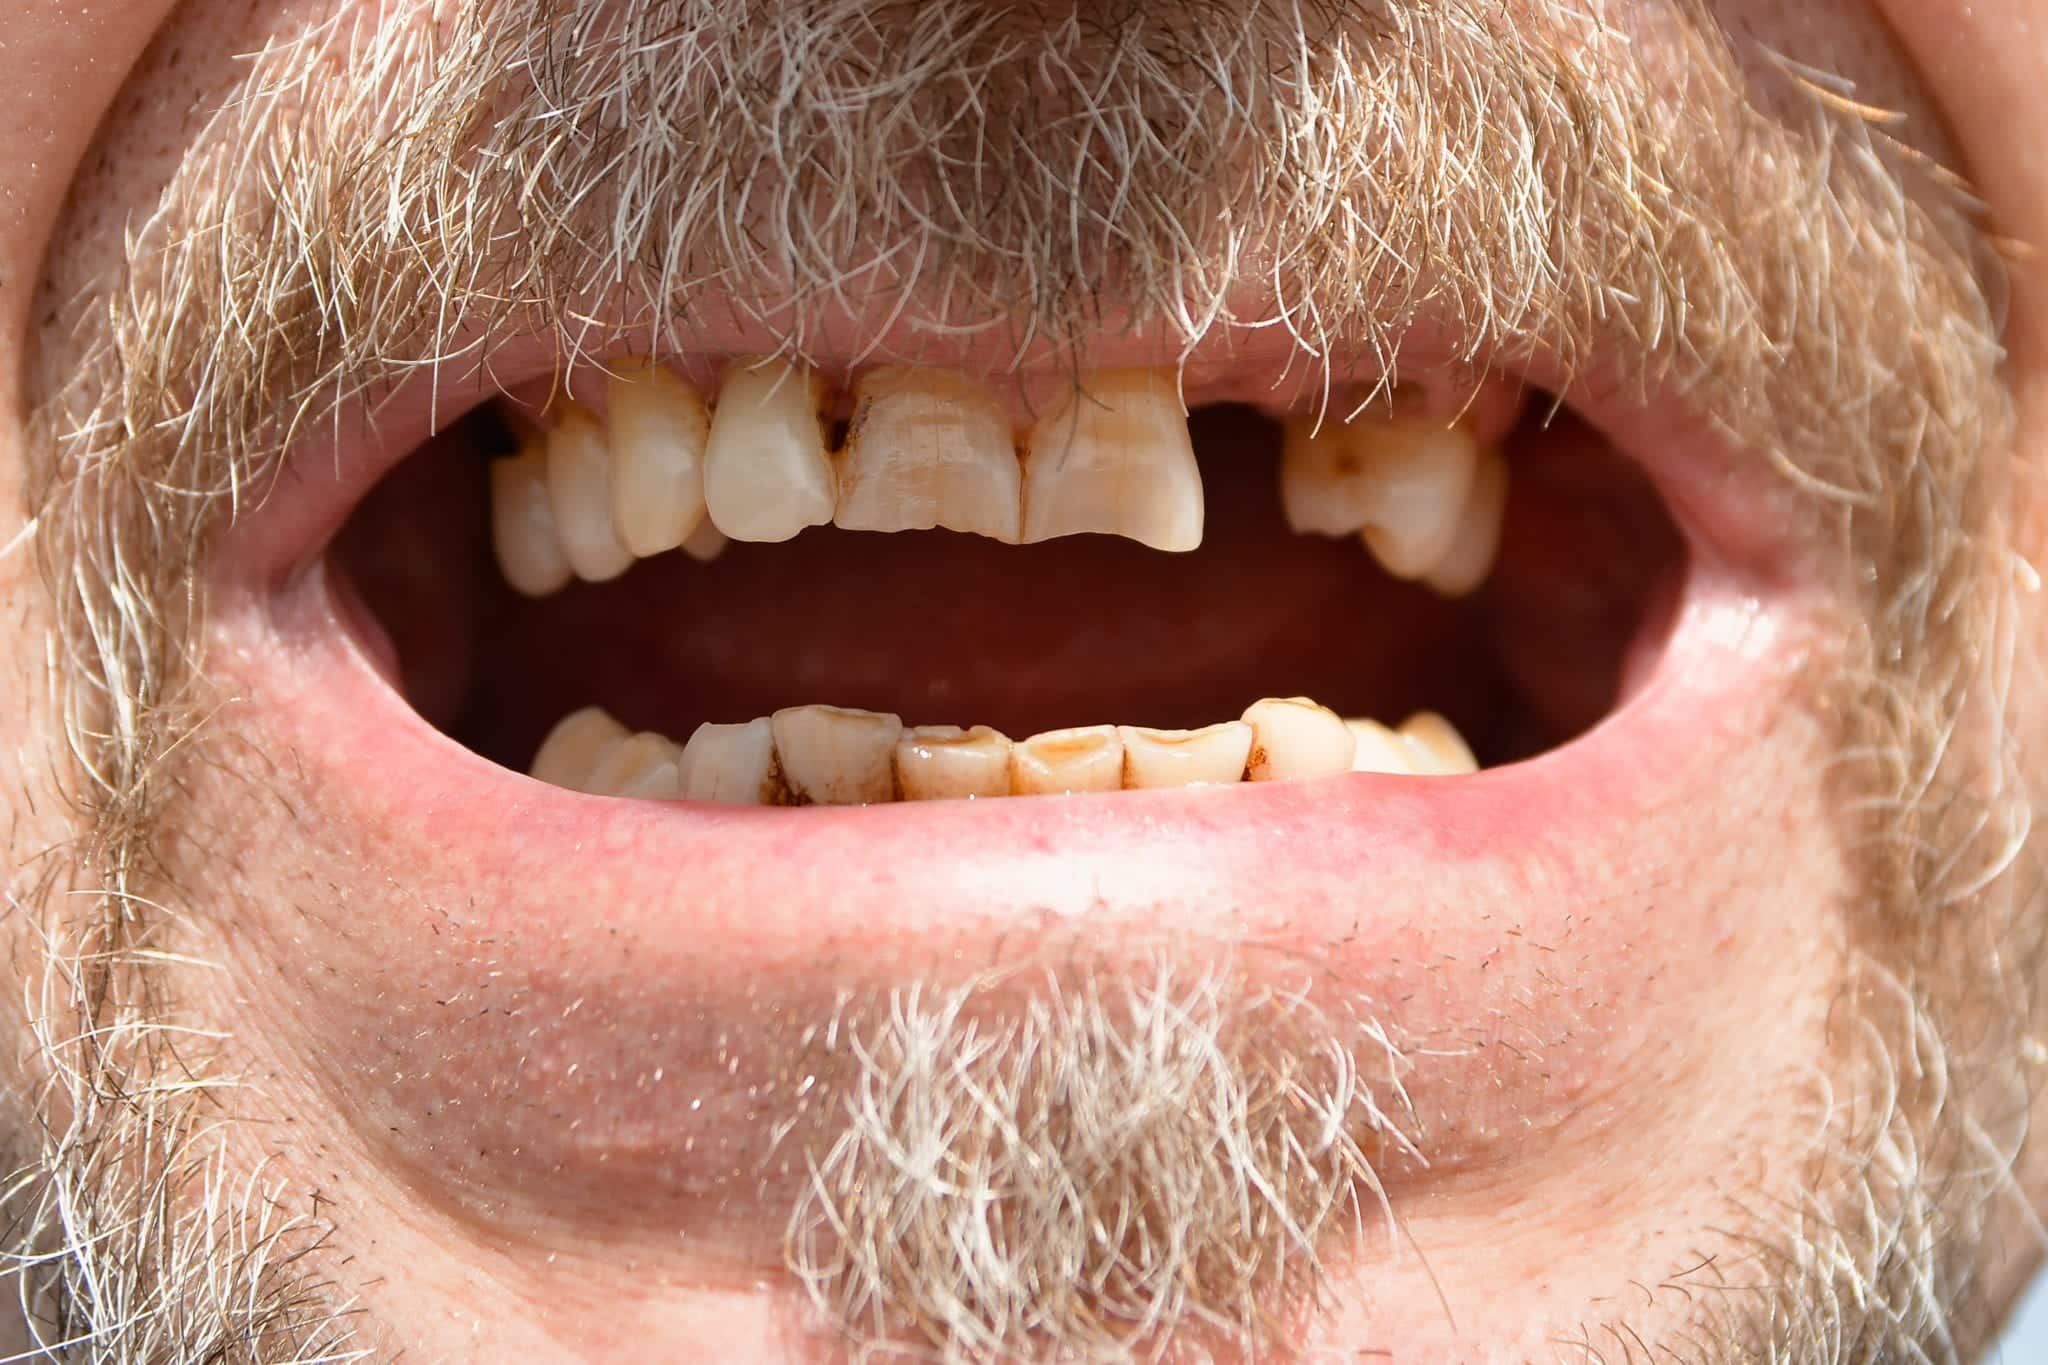 A man's mouth with diseased teeth.